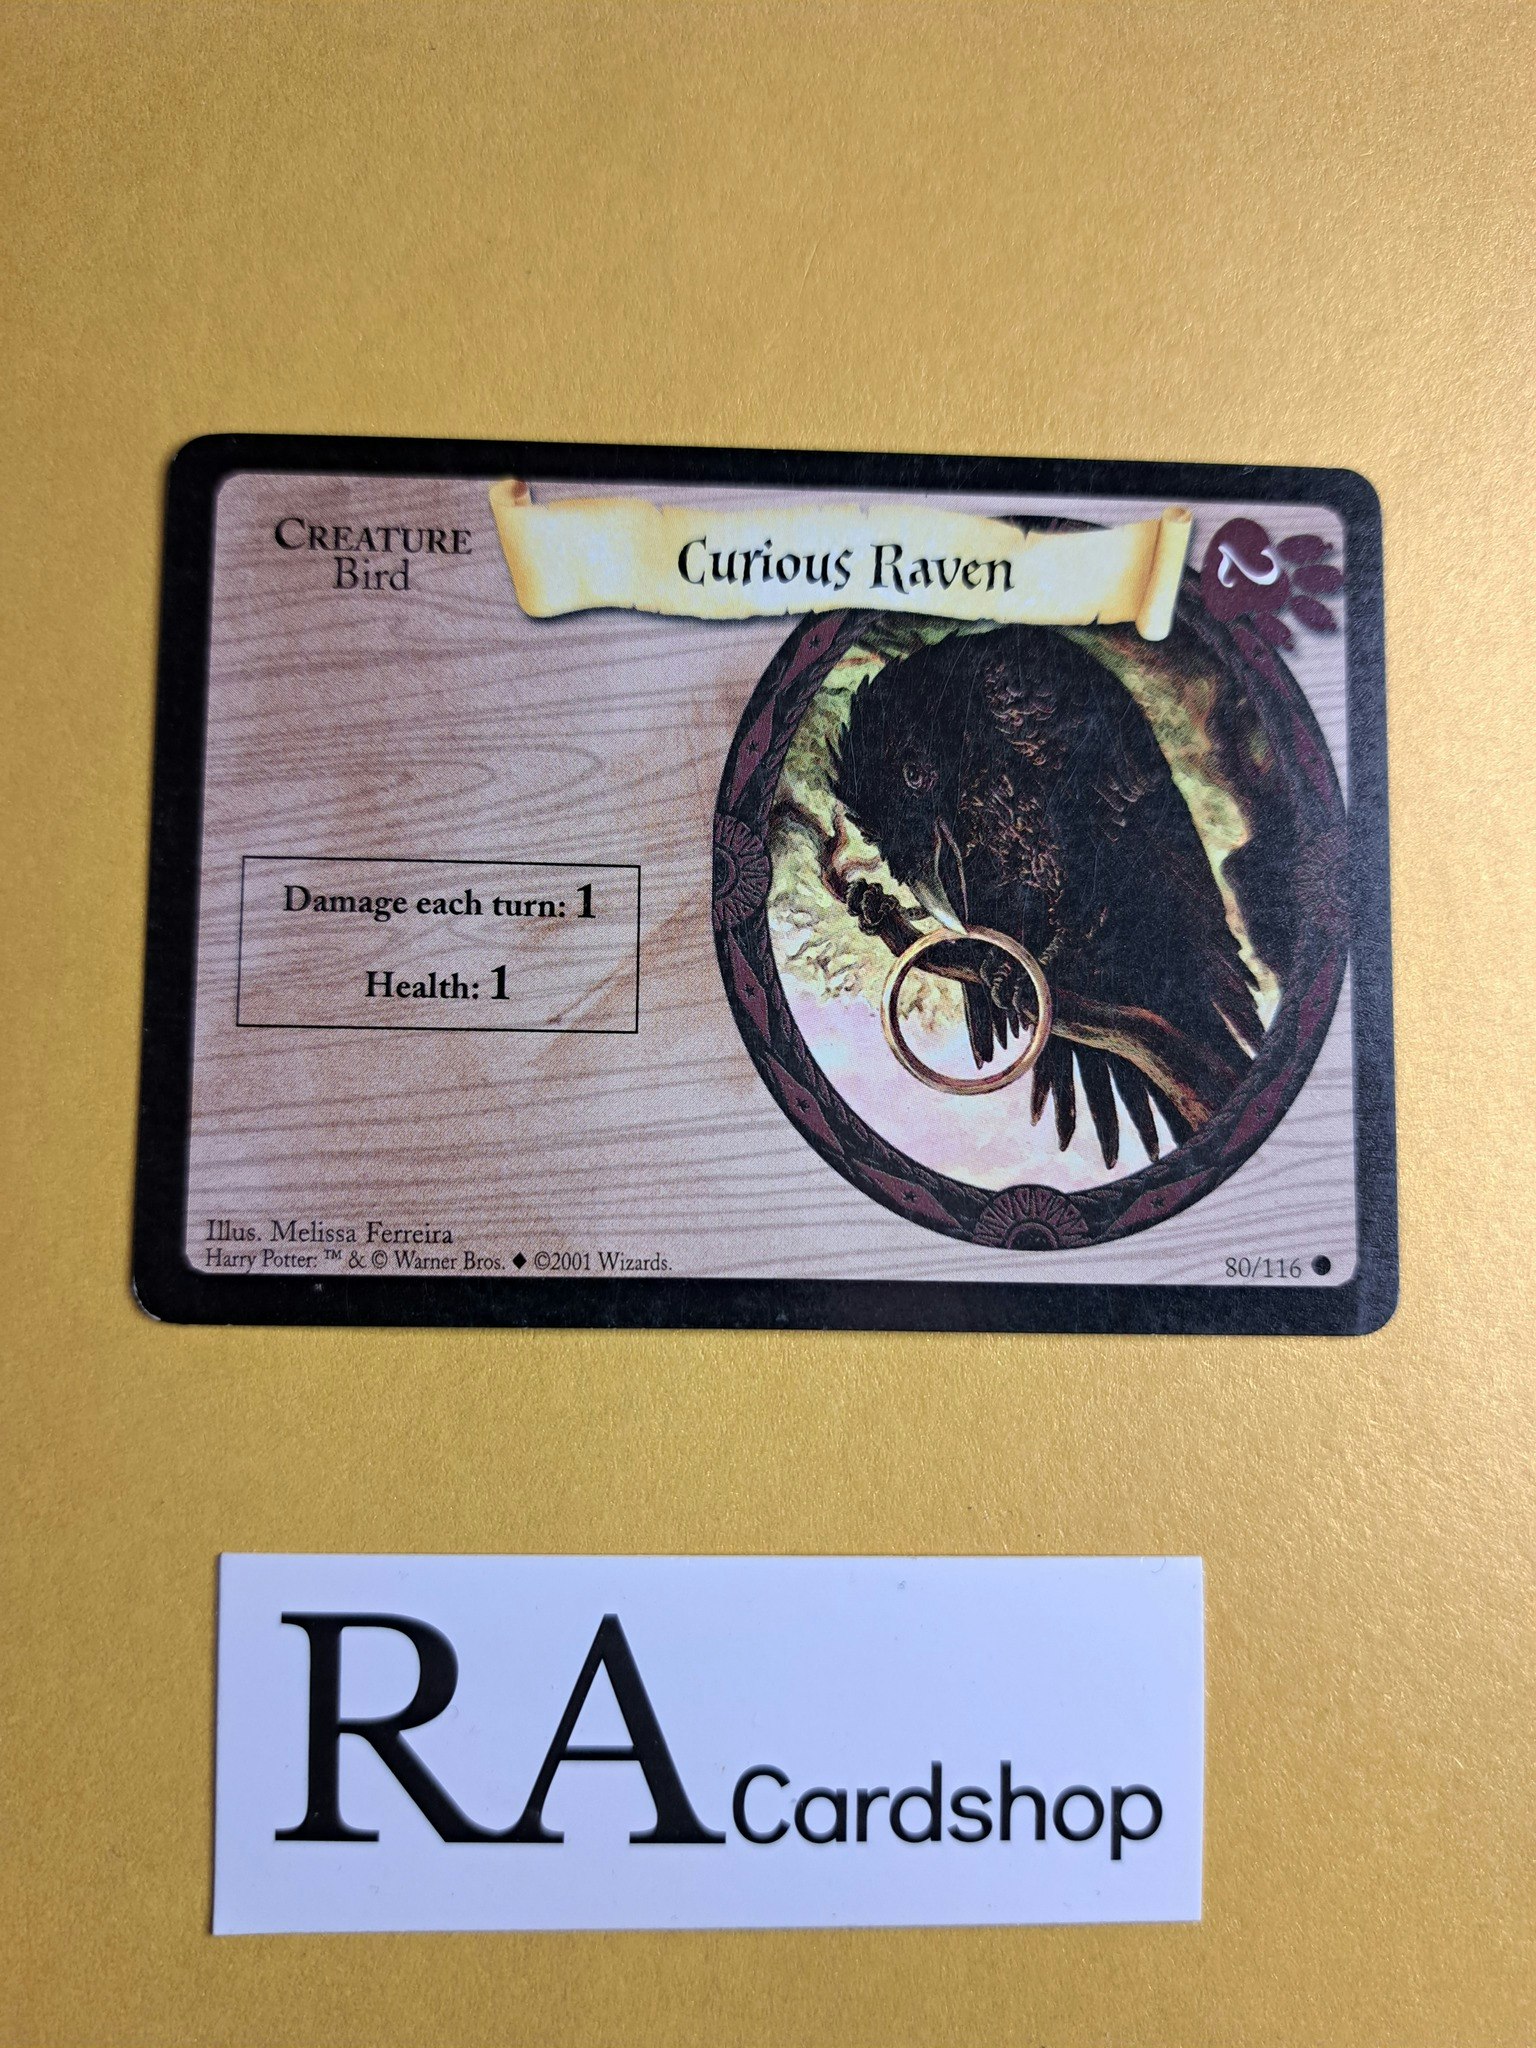 Curious Raven Common 80/116 Harry Potter Trading Card Game 2001